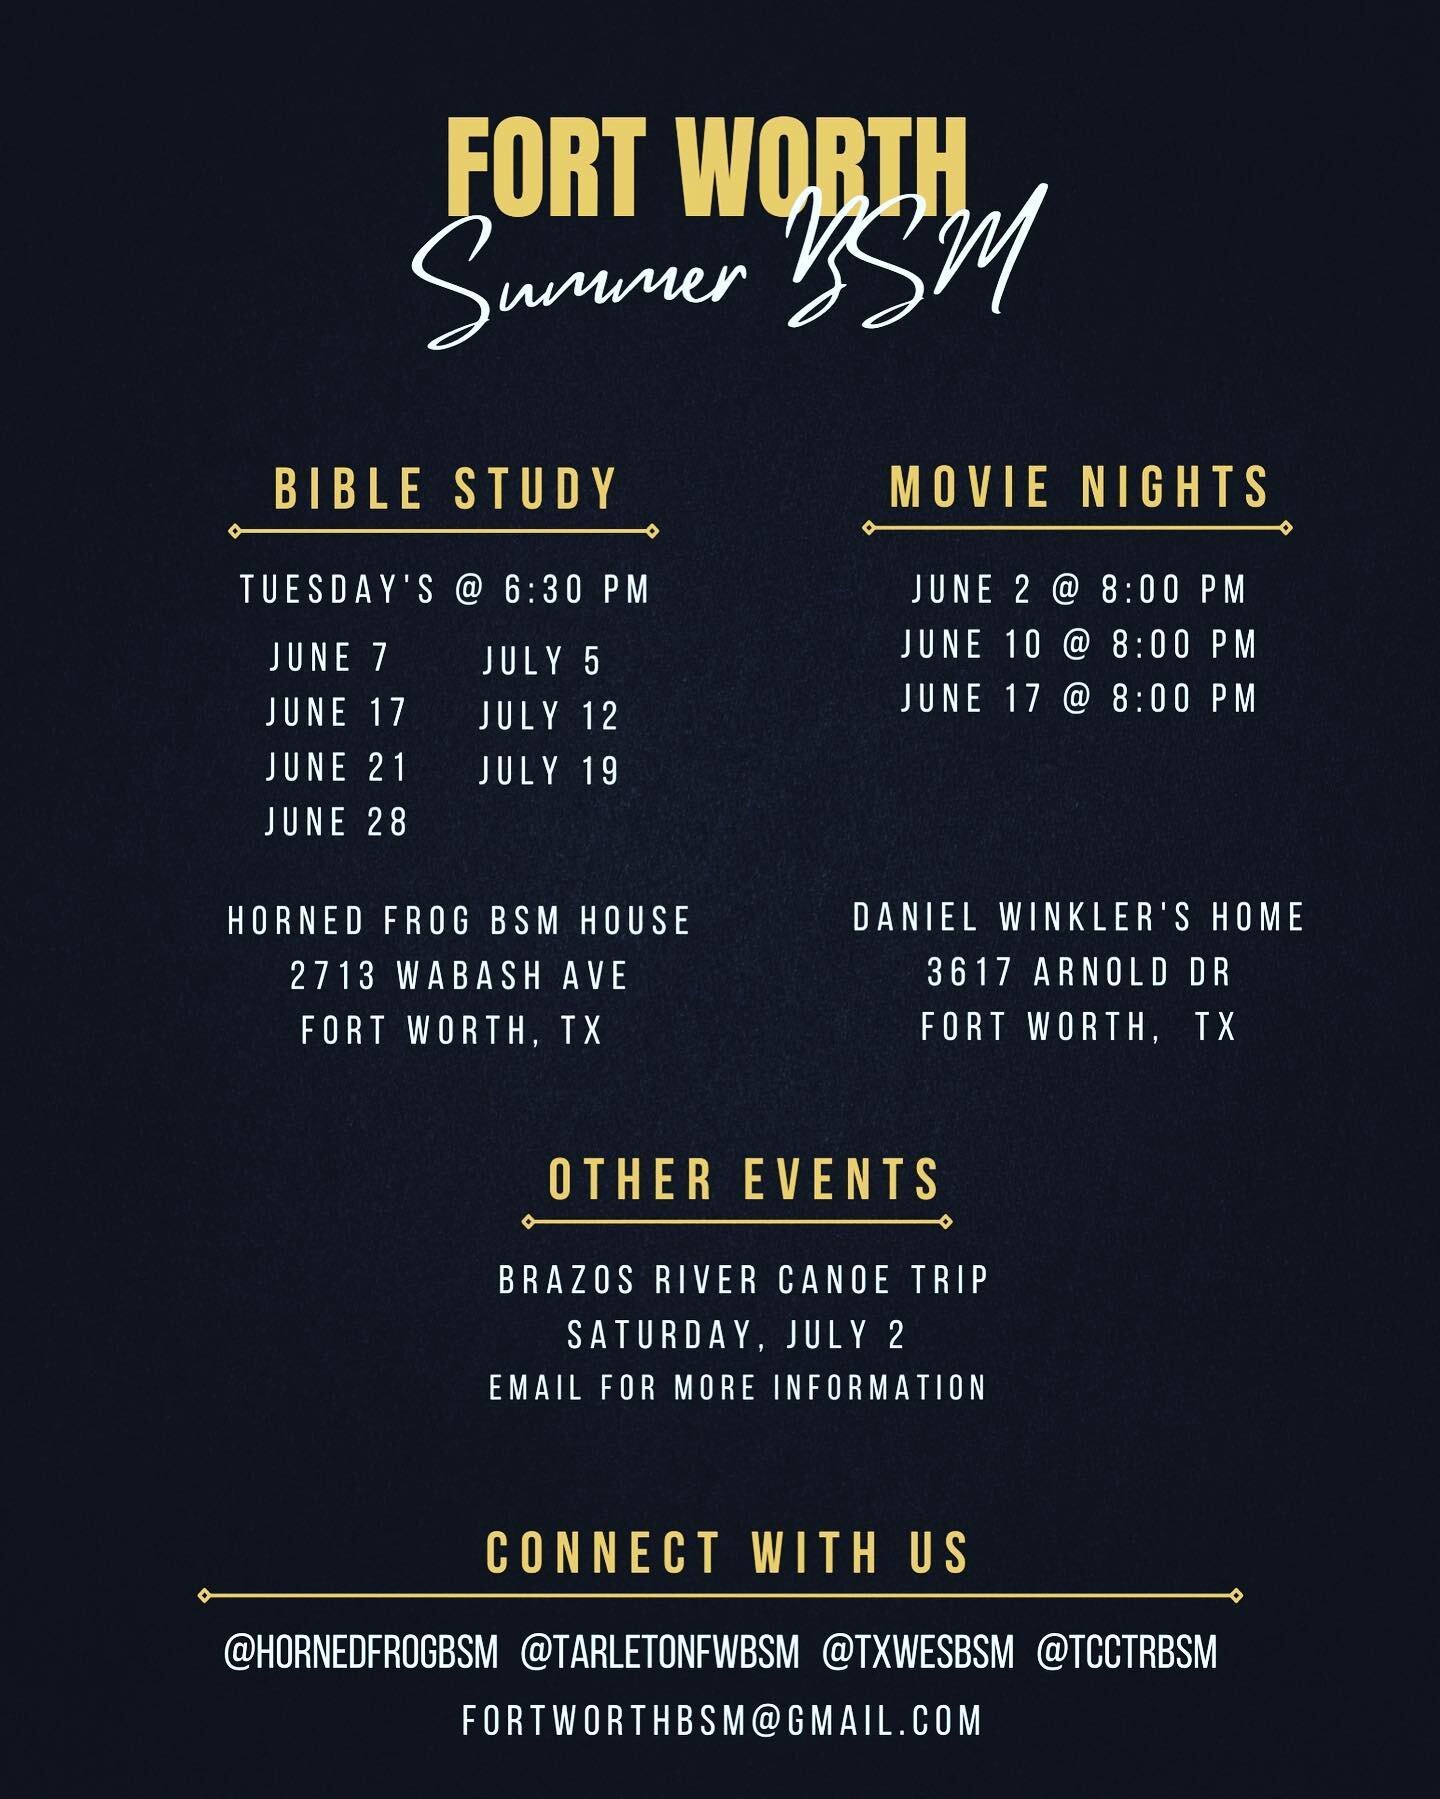 Hey y&rsquo;all! Here&rsquo;s our summer schedule for the BSM and you&rsquo;re not gonna wanna miss out! Make sure to stick around after Bible study because we&rsquo;ll be doing something fun after. Hope to see y&rsquo;all there!